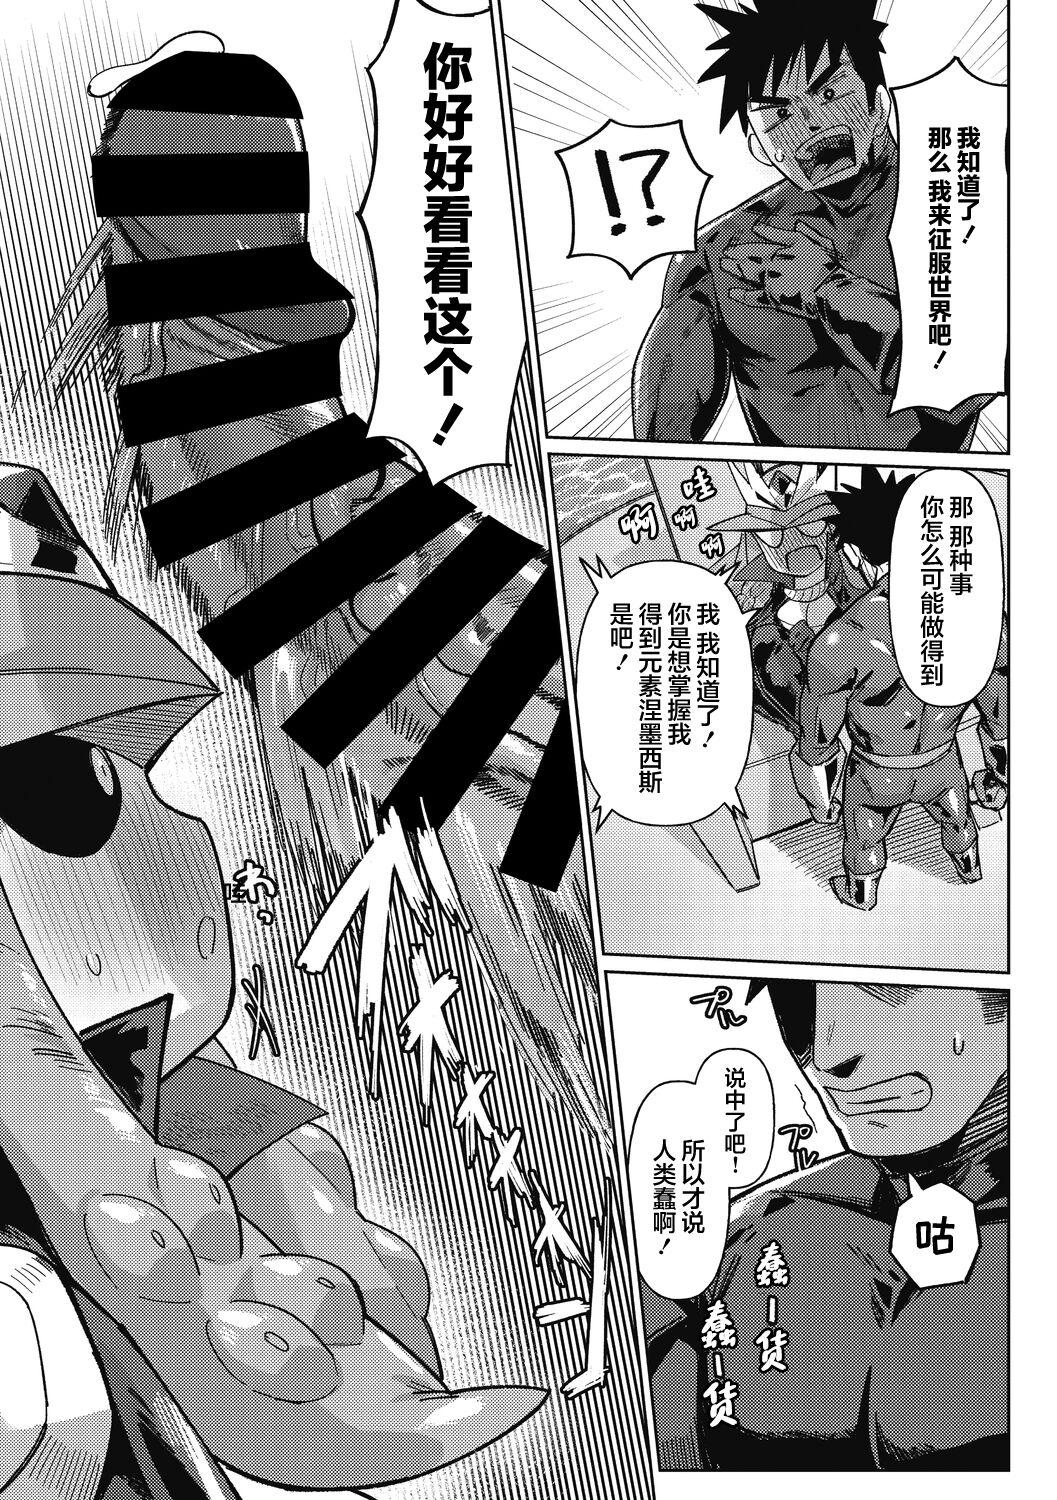 Cum Eating Geso Smith / ゲソスミス …… 『超人戦隊ギャレンジャー』(肉包汉化组) （Chinese） - Original Beach - Page 8